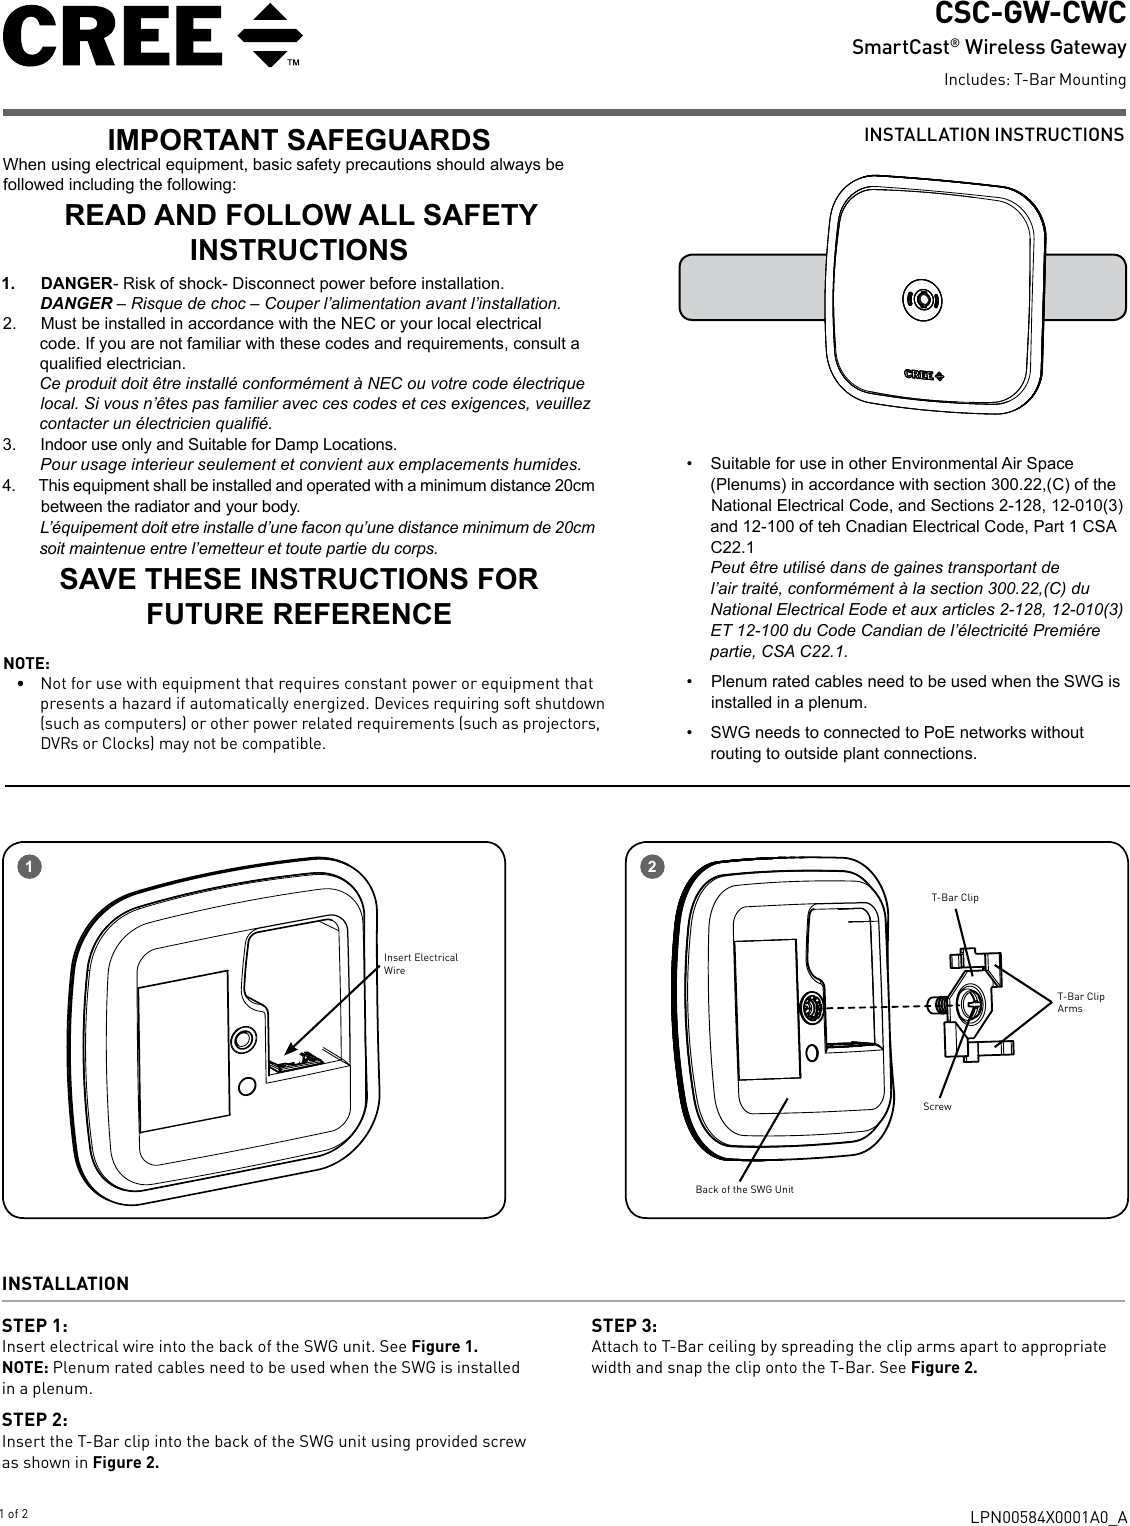 INSTALLATION INSTRUCTIONSCSC-GW-CWC SmartCast®  Wireless GatewayIncludes: T-Bar MountingLPN00584X0001A0_A1 of 21Insert Electrical WireIMPORTANT SAFEGUARDSWhen using electrical equipment, basic safety precautions should always be followed including the following:READ AND FOLLOW ALL SAFETY INSTRUCTIONS1.  DANGER- Risk of shock- Disconnect power before installation.DANGER – Risque de choc – Couper l’alimentation avant l’installation.2.  Must be installed in accordance with the NEC or your local electrical code. If you are not familiar with these codes and requirements, consult a qualied electrician. Ce produit doit être installé conformément à NEC ou votre code électrique local. Si vous n’êtes pas familier avec ces codes et ces exigences, veuillez contacter un électricien qualié.3.  Indoor use only and Suitable for Damp Locations. Pour usage interieur seulement et convient aux emplacements humides.4.  This equipment shall be installed and operated with a minimum distance 20cm between the radiator and your body.L’équipement doit etre installe d’une facon qu’une distance minimum de 20cm soit maintenue entre l’emetteur et toute partie du corps.SAVE THESE INSTRUCTIONS FOR FUTURE REFERENCE•  Suitable for use in other Environmental Air Space (Plenums) in accordance with section 300.22,(C) of the National Electrical Code, and Sections 2-128, 12-010(3) and 12-100 of teh Cnadian Electrical Code, Part 1 CSA C22.1Peut être utilisé dans de gaines transportant de l’air traité, conformément à la section 300.22,(C) du National Electrical Eode et aux articles 2-128, 12-010(3) ET 12-100 du Code Candian de l’électricité Premiére partie, CSA C22.1.•  Plenum rated cables need to be used when the SWG is installed in a plenum.•  SWG needs to connected to PoE networks without routing to outside plant connections.NOTE:•  Not for use with equipment that requires constant power or equipment that presents a hazard if automatically energized. Devices requiring soft shutdown (such as computers) or other power related requirements (such as projectors, DVRs or Clocks) may not be compatible. INSTALLATION STEP 1: Insert electrical wire into the back of the SWG unit. See Figure 1.NOTE: Plenum rated cables need to be used when the SWG is installed in a plenum.STEP 2: Insert the T-Bar clip into the back of the SWG unit using provided screw as shown in Figure 2.STEP 3: Attach to T-Bar ceiling by spreading the clip arms apart to appropriate width and snap the clip onto the T-Bar. See Figure 2.2T-Bar Clip ArmsT-Bar ClipScrewBack of the SWG Unit